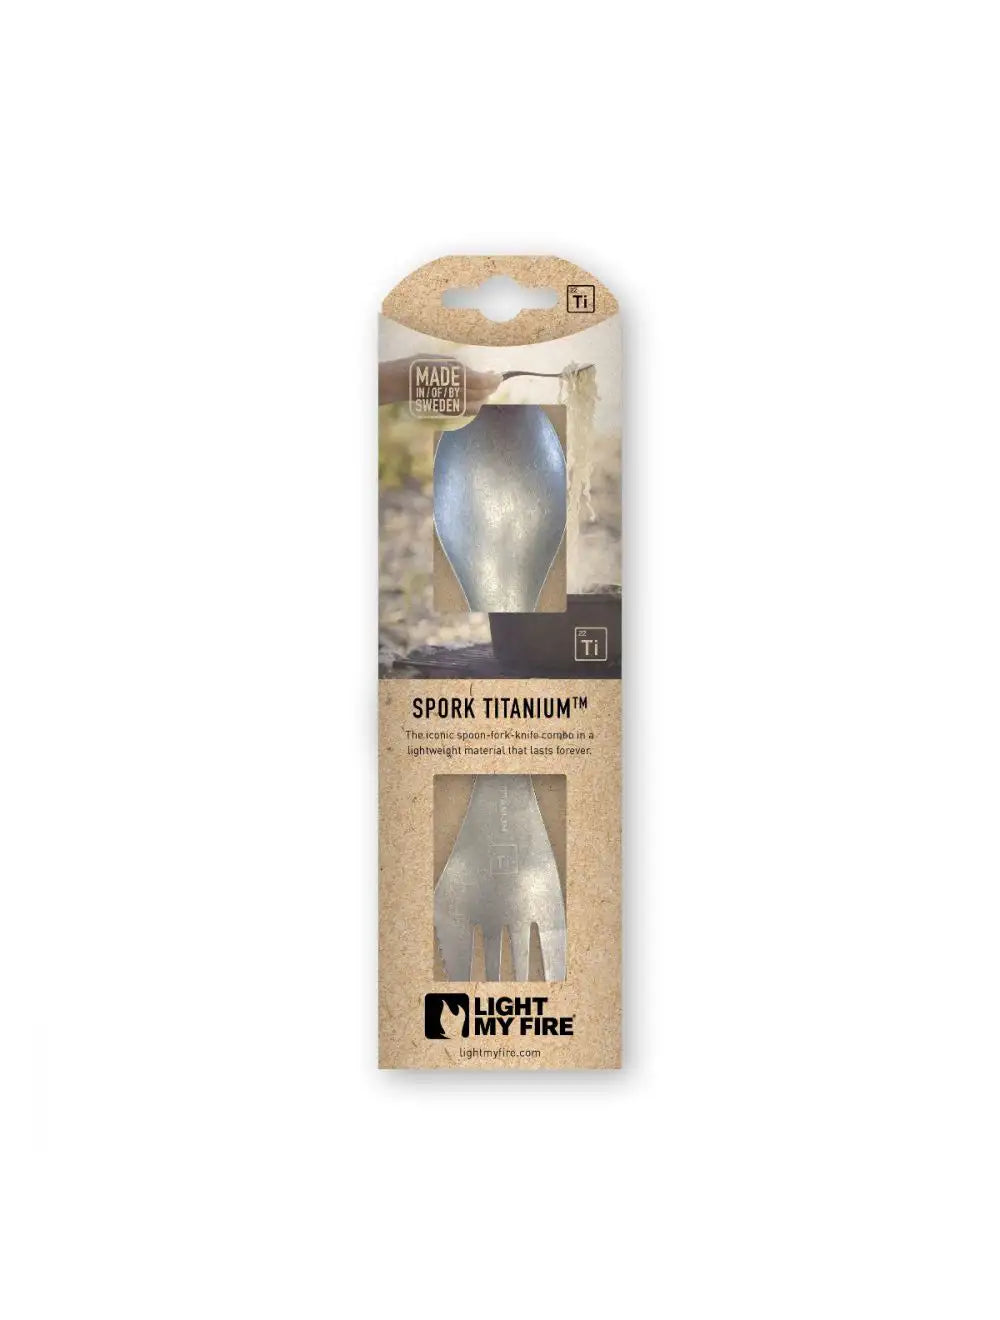 Spork Titanium - knife, fork &amp; spoon in one, with protective bag